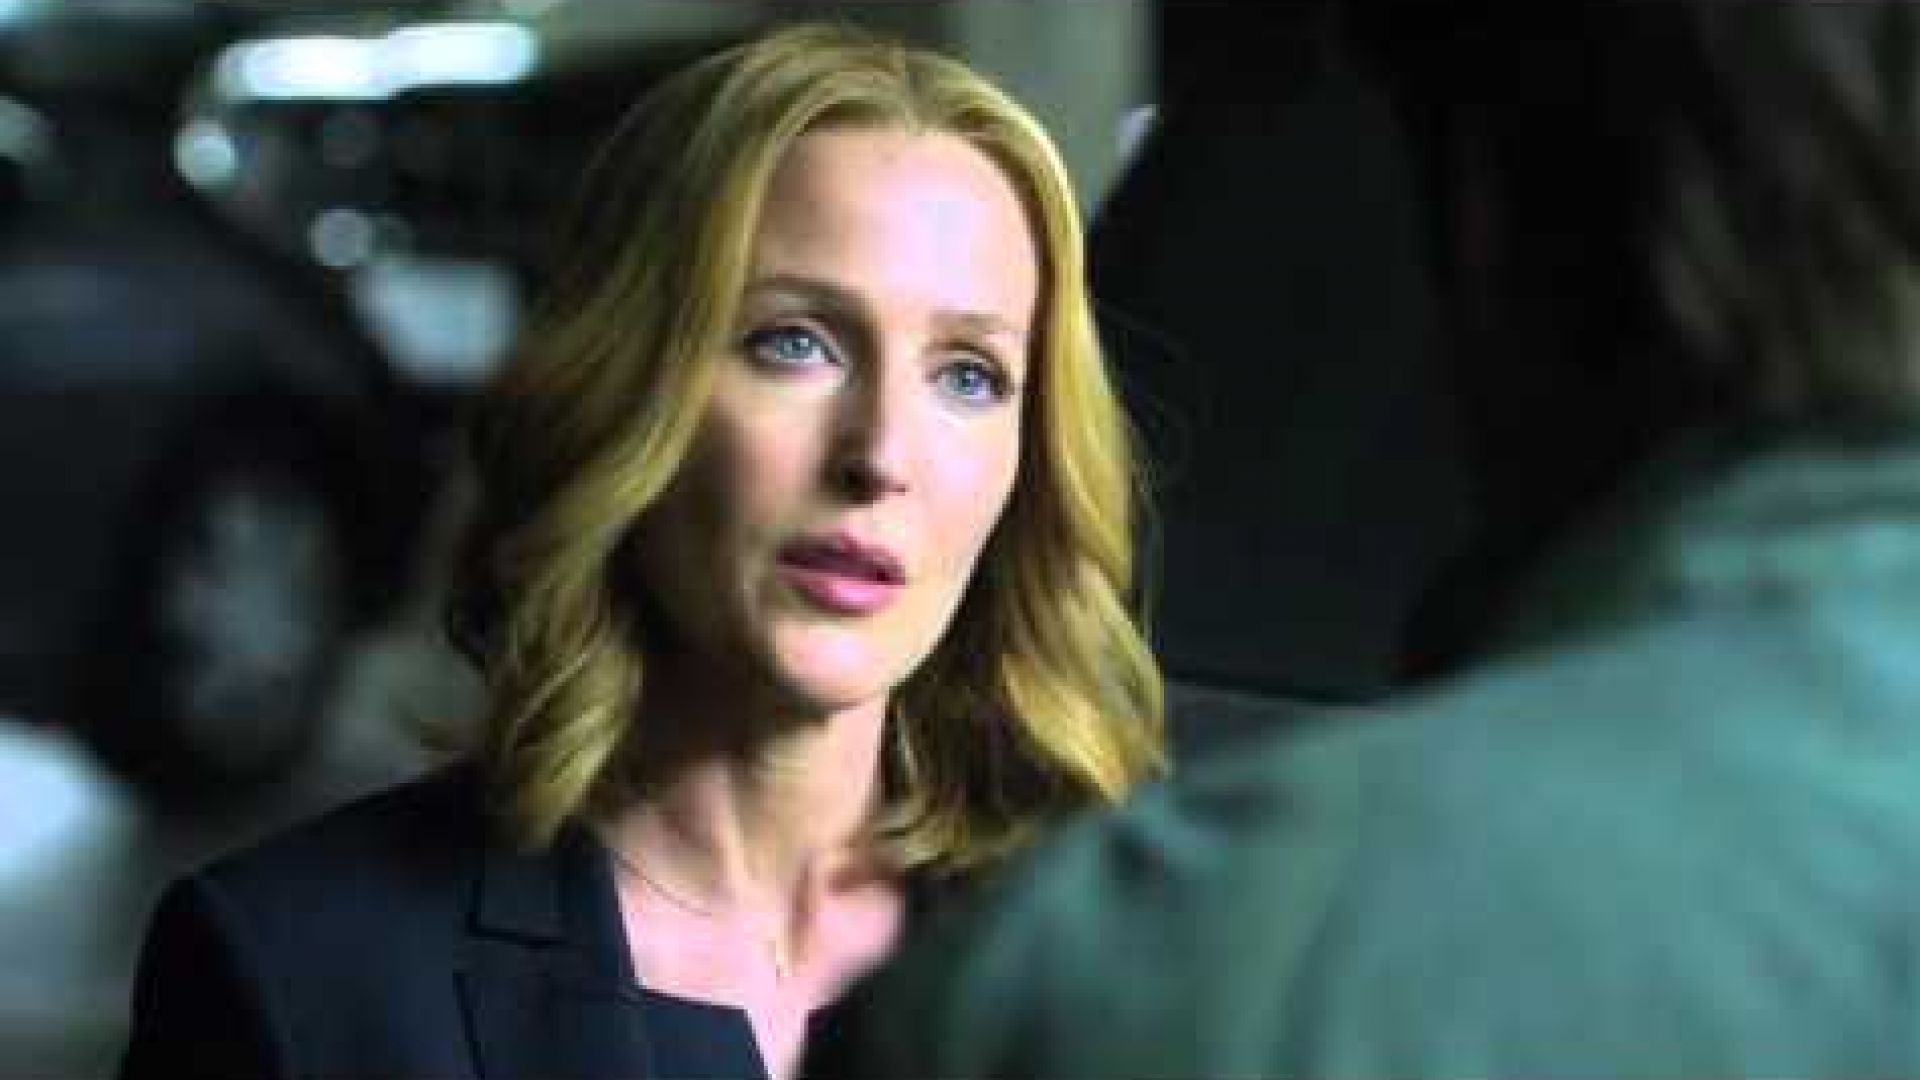 New X-Files Teaser. &quot;Are you ready for this Scully?&quot;